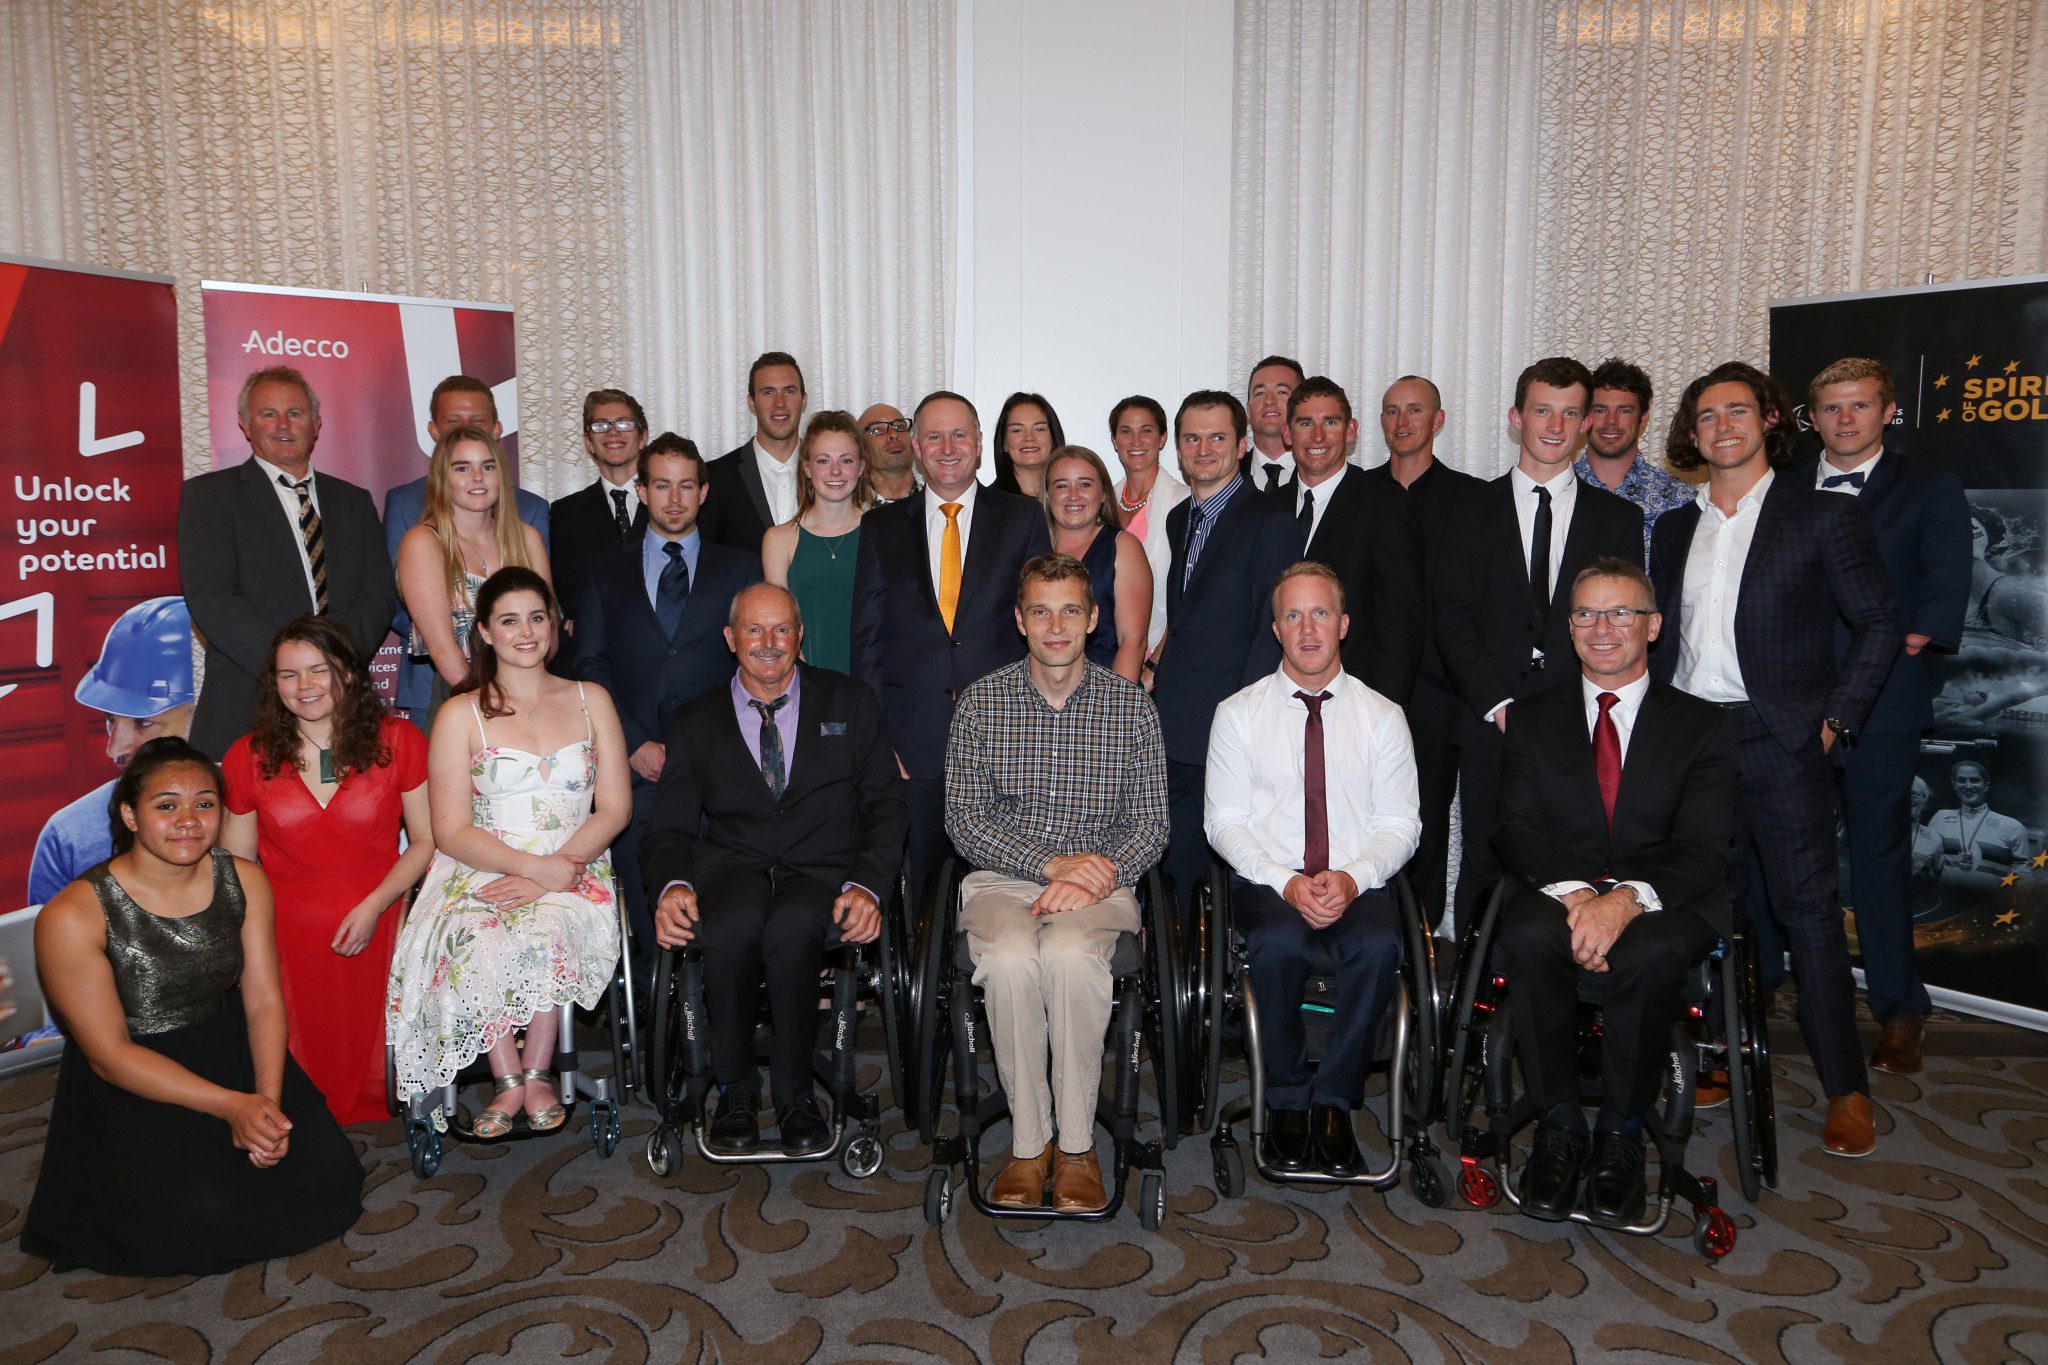 Members of the New Zealand Rio 2016 Paralympic Team and Sochi 2014 Paralympic Winter Team with Prime Minister John Key. 